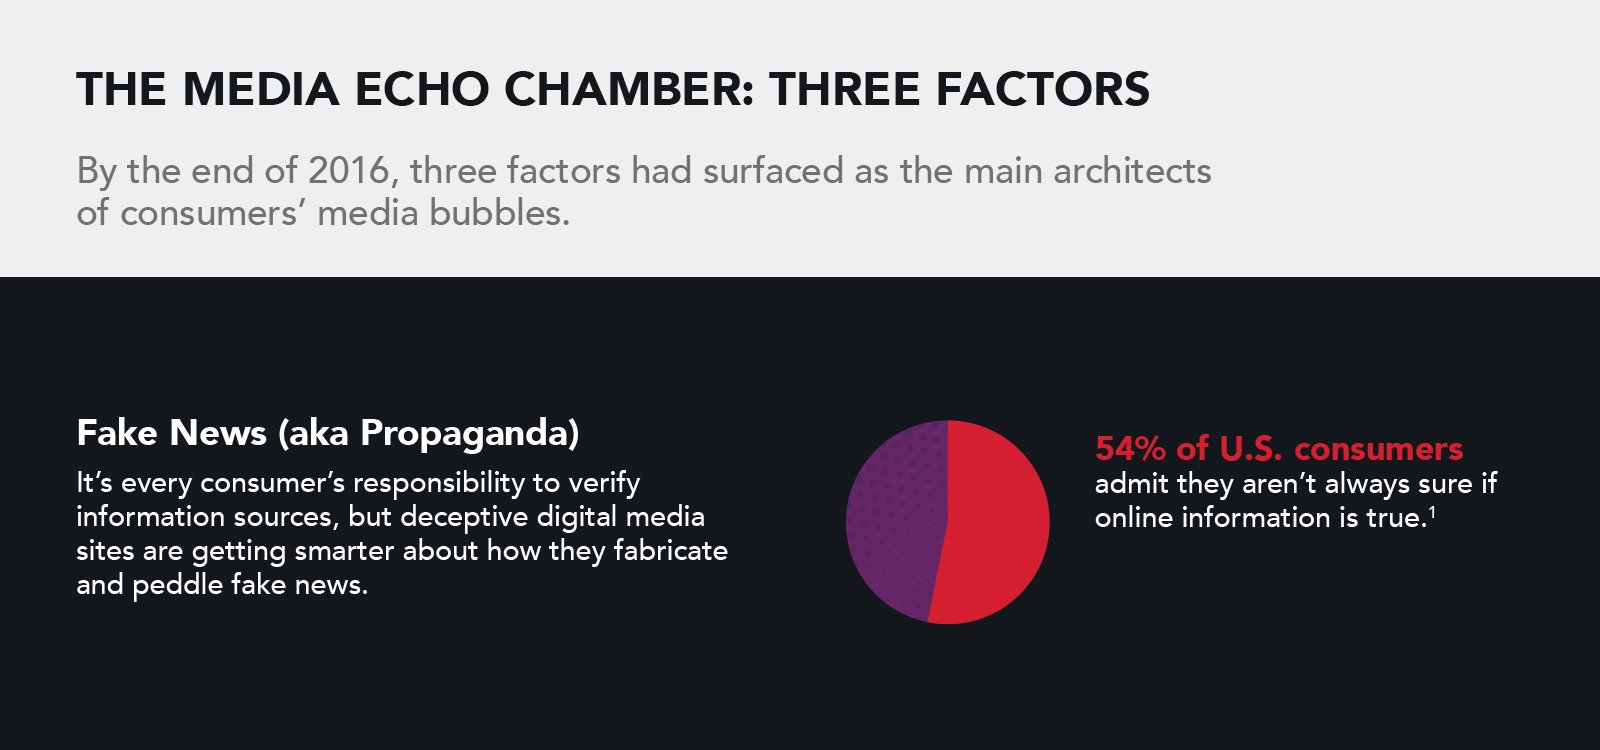 Publicis Experiential Digital Brands and Live Experiences - Media echo chamber's fake news a.k.a. propaganda